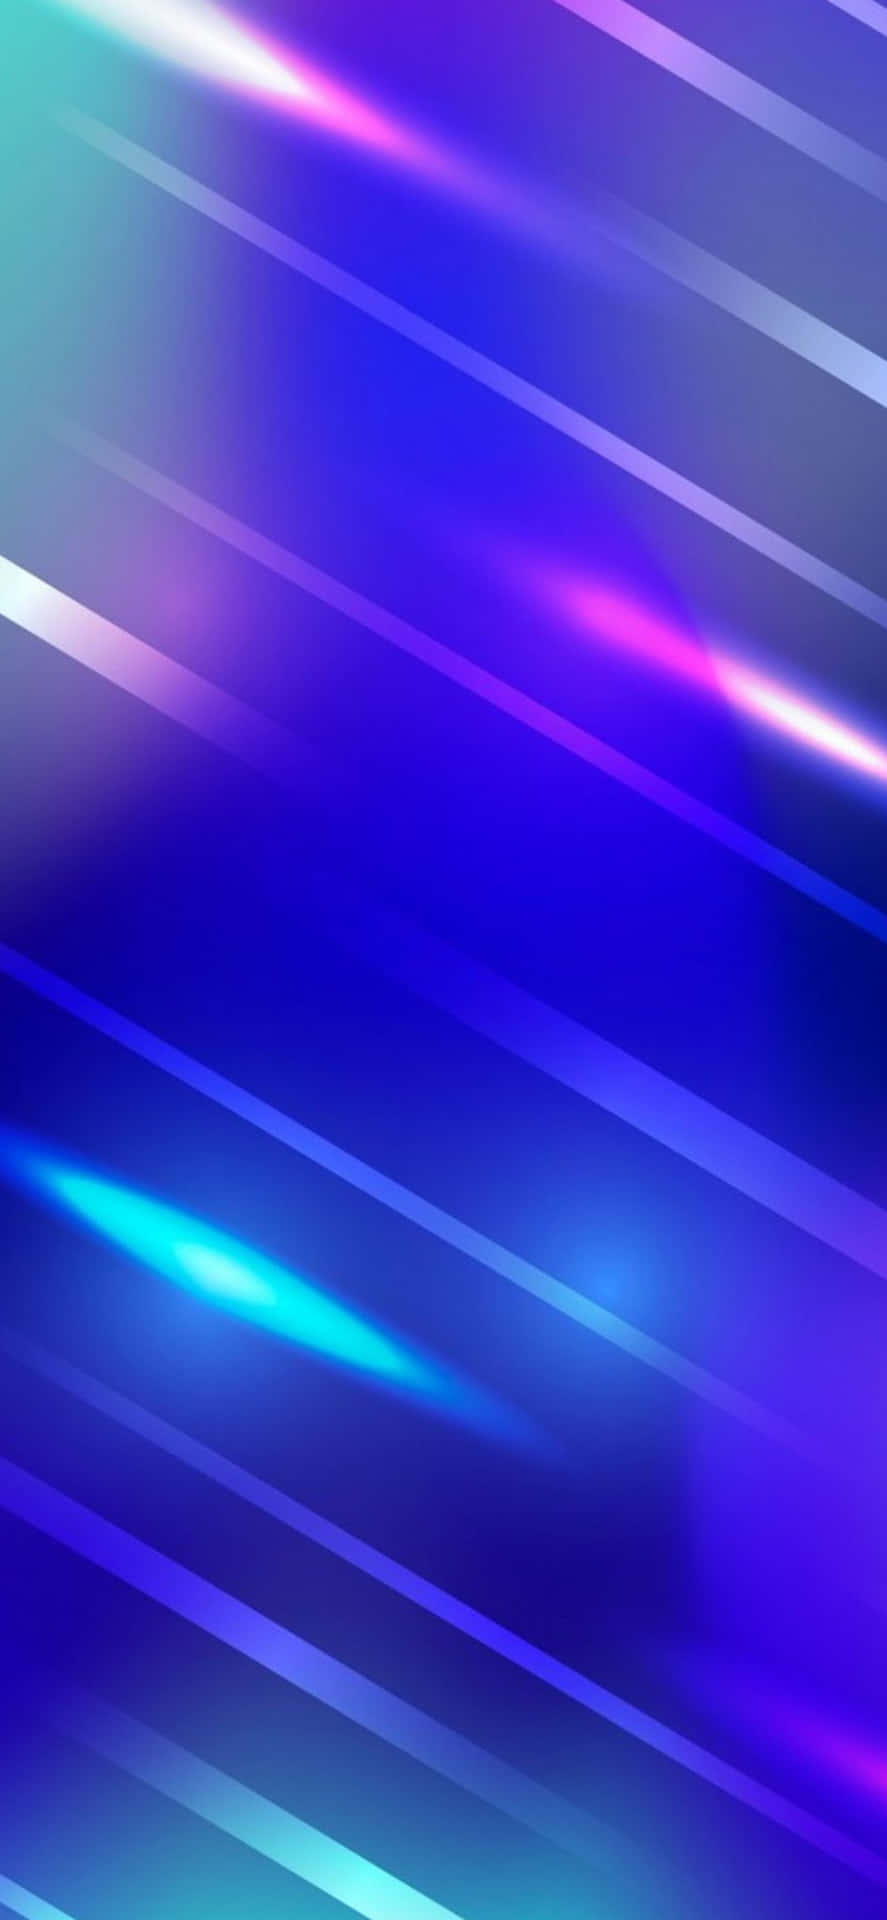 Blue And Purple Abstract Background With Lines